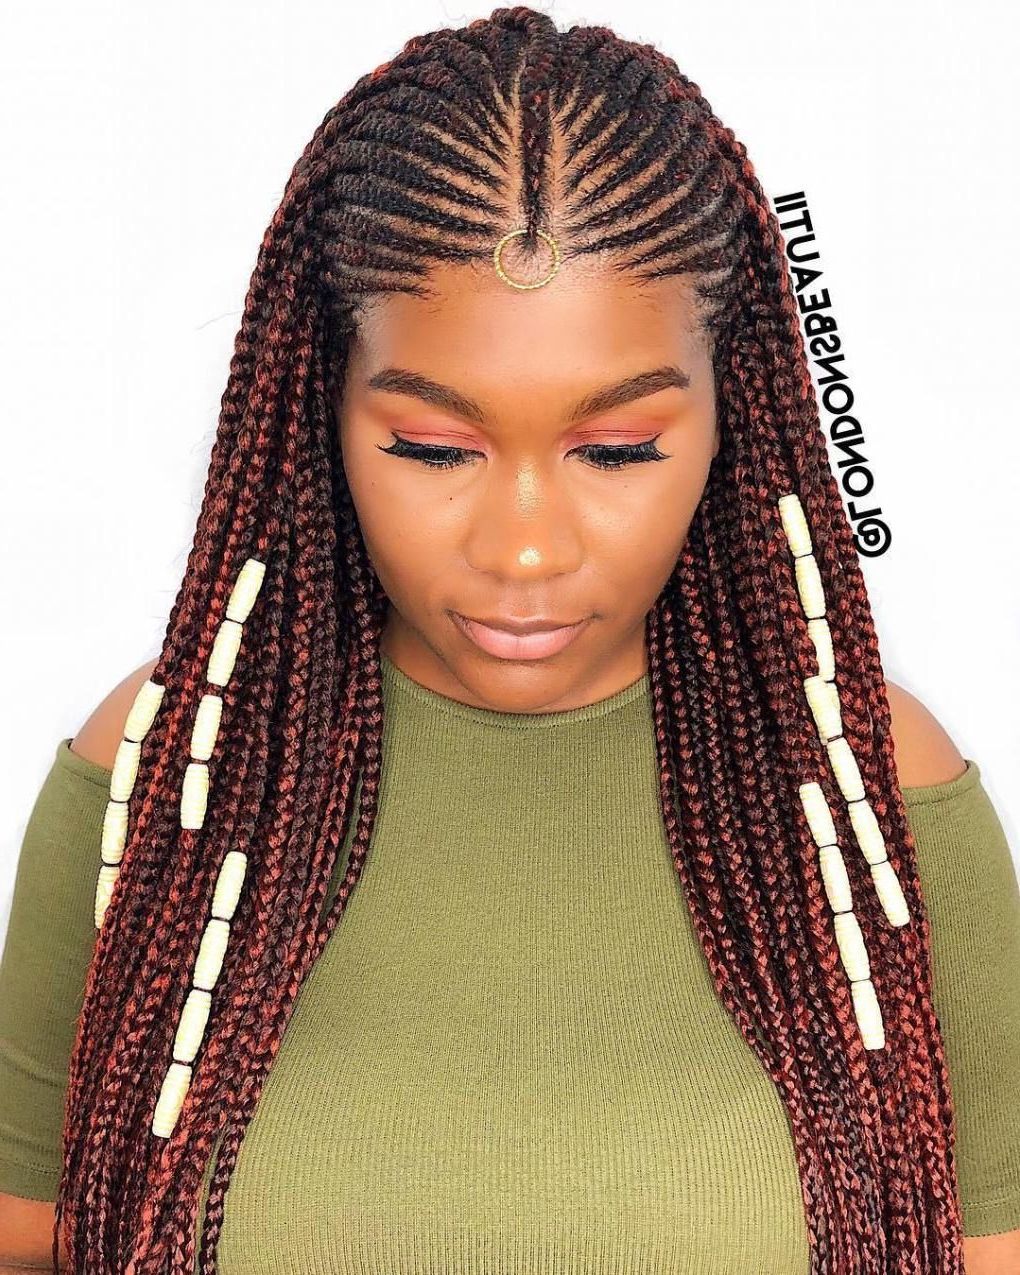 20 Amazing Fulani Braids For Women Of All Ages In 2019 With Famous Braided Crown Hairstyles With Bright Beads (Gallery 3 of 20)